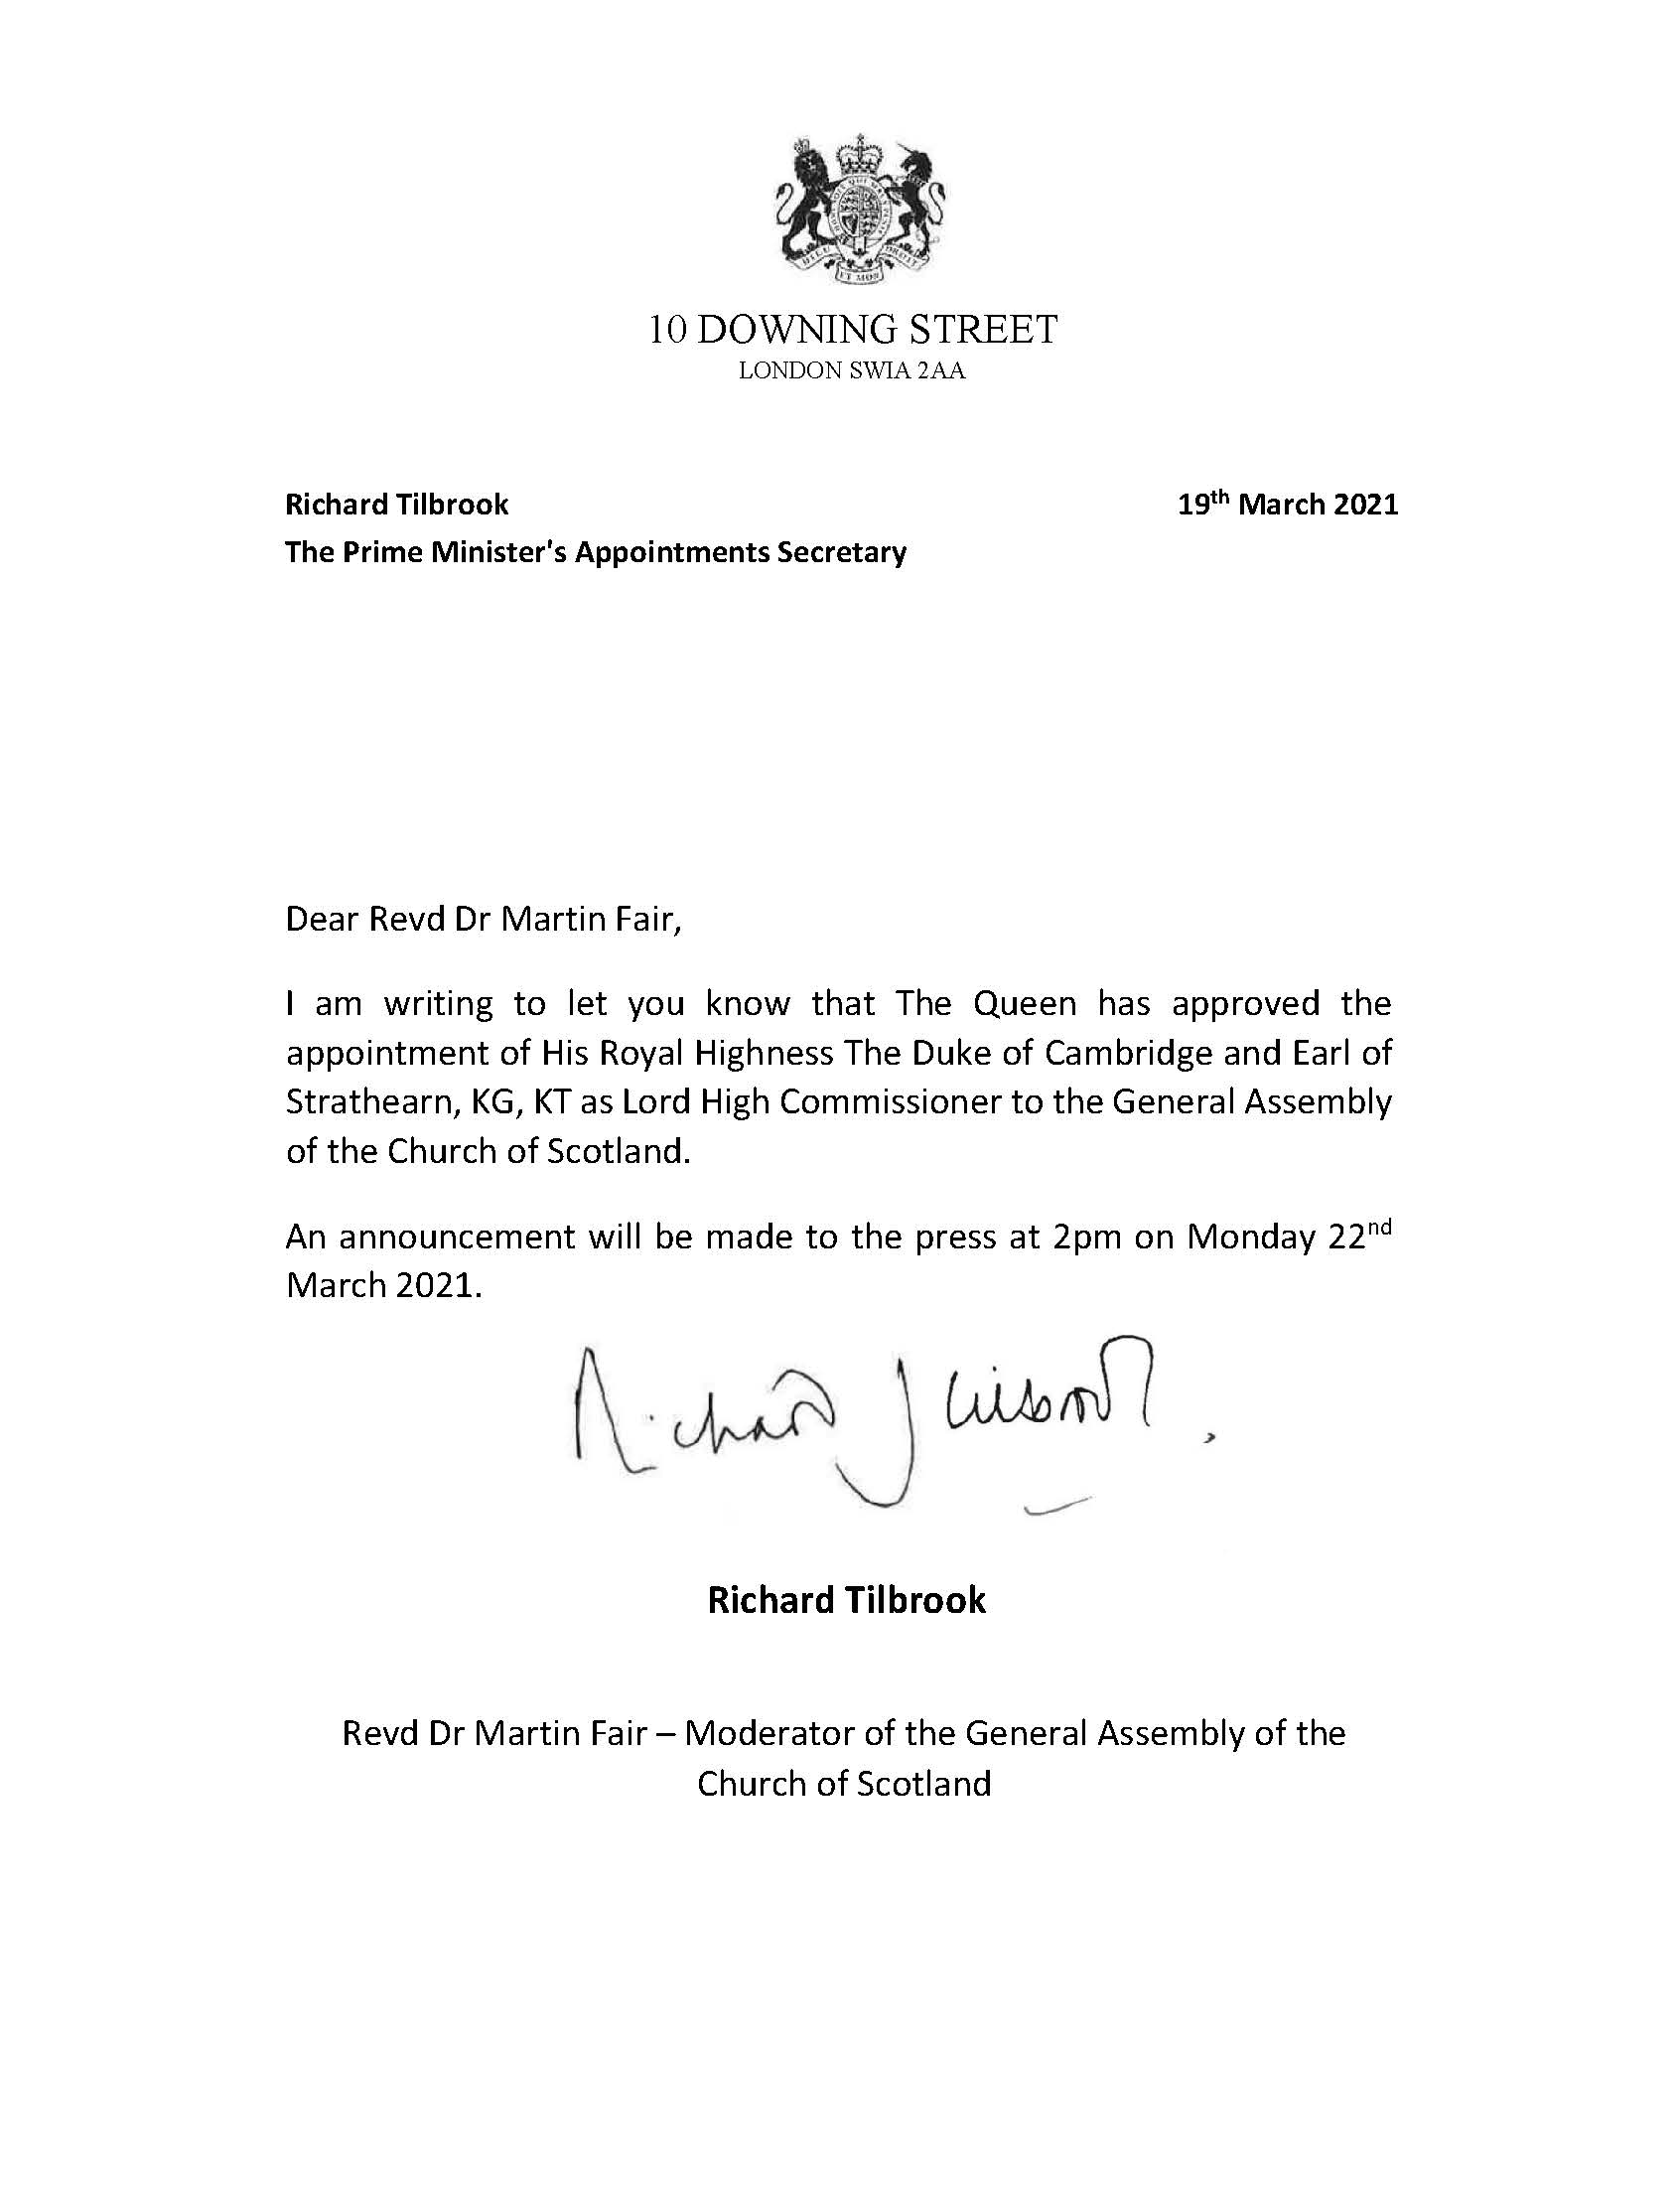 Announcement letter from 10 Downing Street